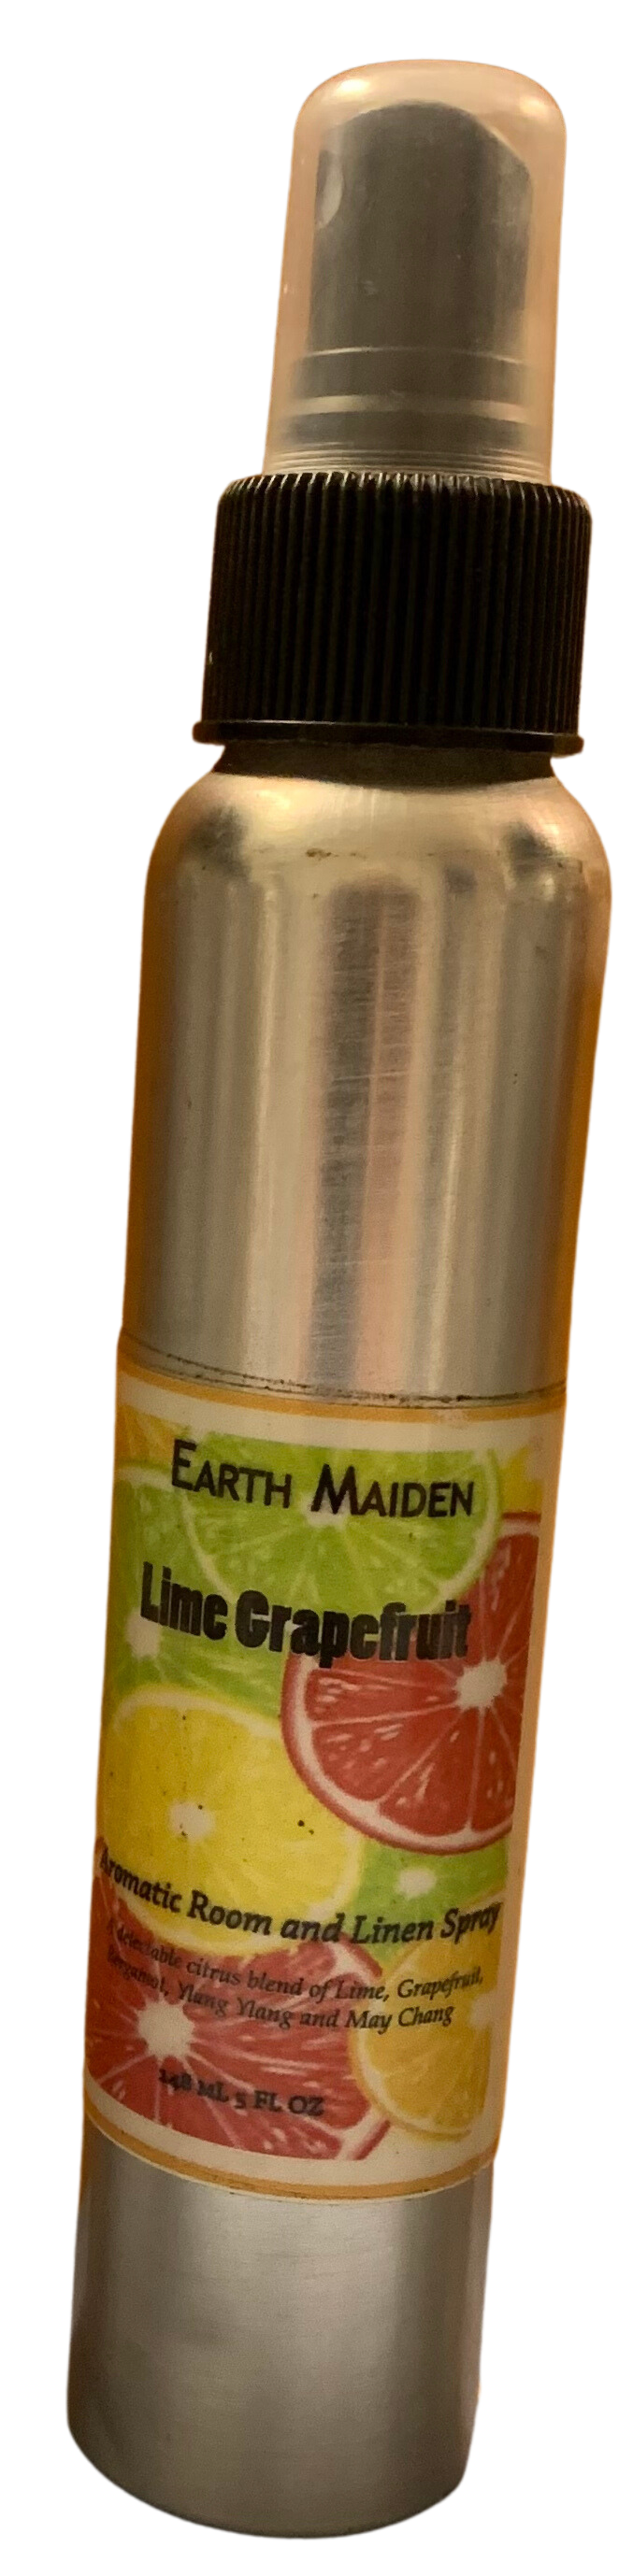 All Natural Lime Grapefruit Aroma Mist with Essential Oils in 5 ounce metal bullet container with fine mist sprayer.